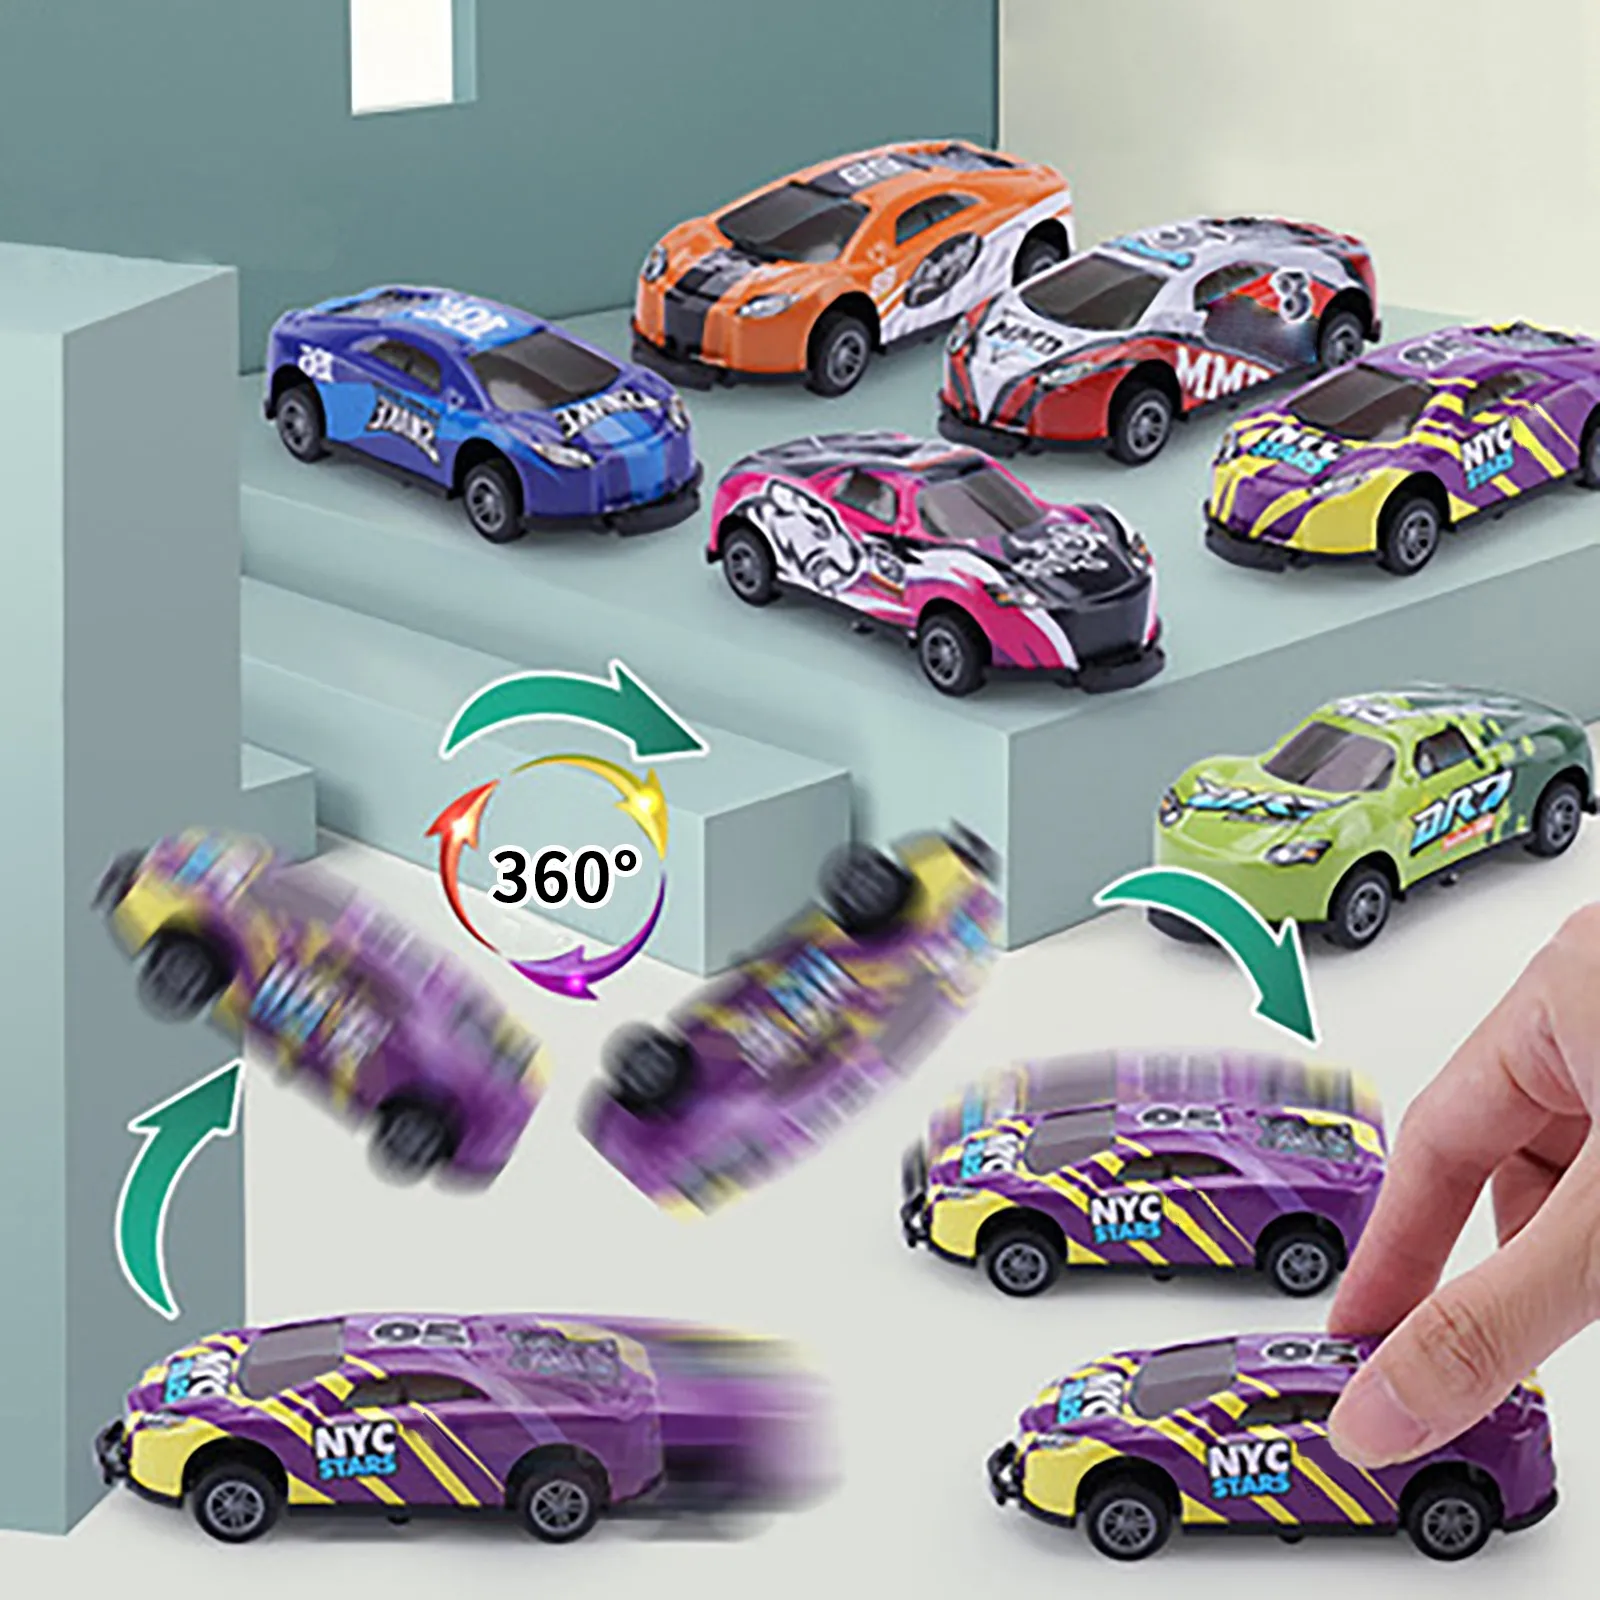 

1pc New Stunt Toy Car Creativity Mini Car Models Pull Back Vehicles Small Game Prizes For Children Kids Boys Juguetes Para Niños